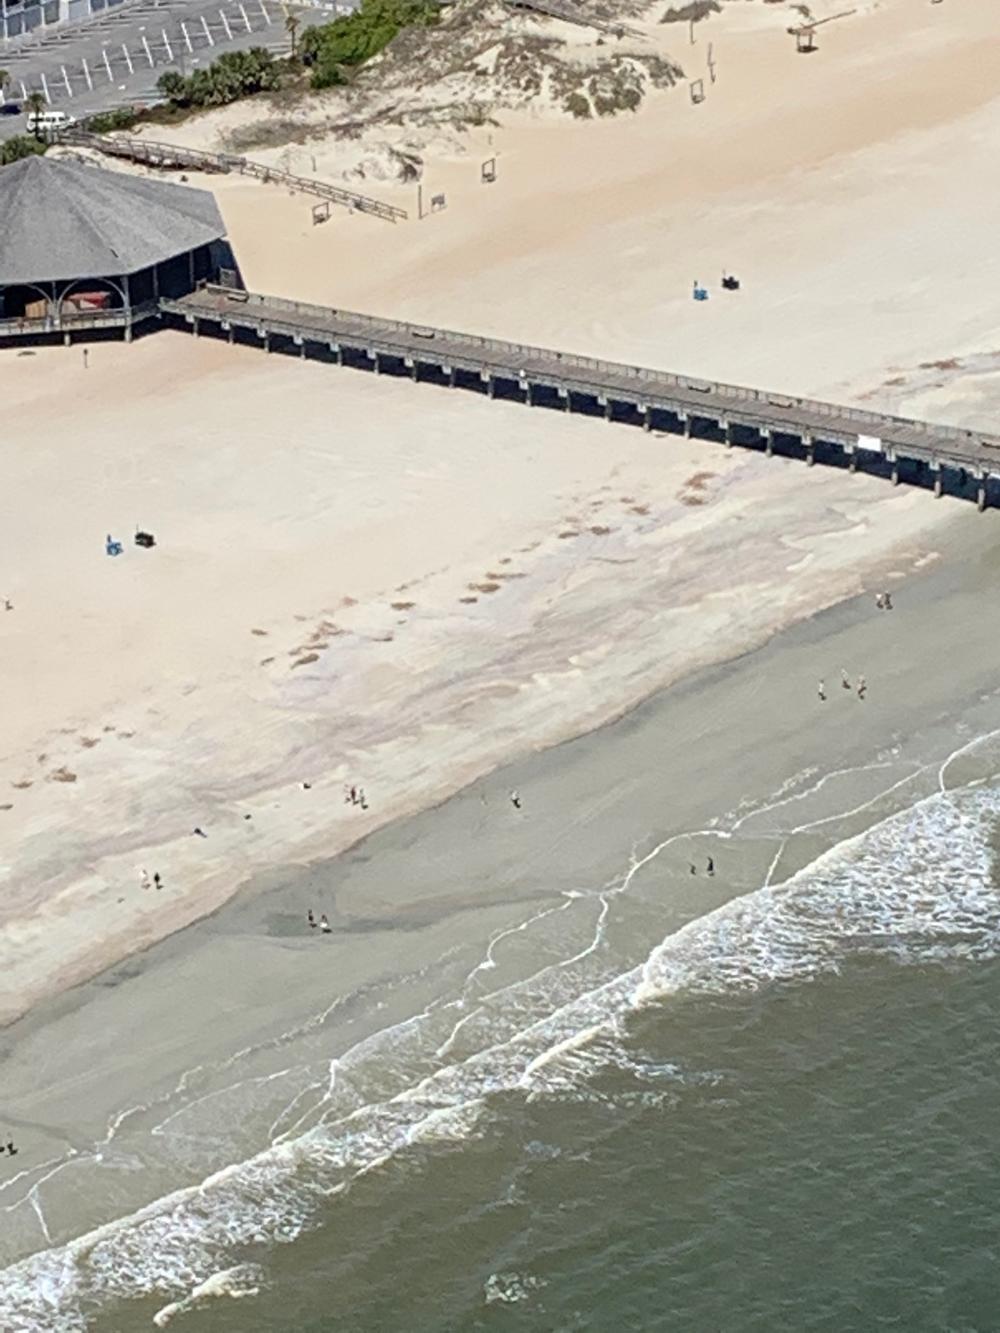 Gov. Brian Kemp shared this aerial photo in a tweet Saturday, saying most beachgoers were locals. But Tybee officials say with beaches reopened, they're now getting visitors from out of state.